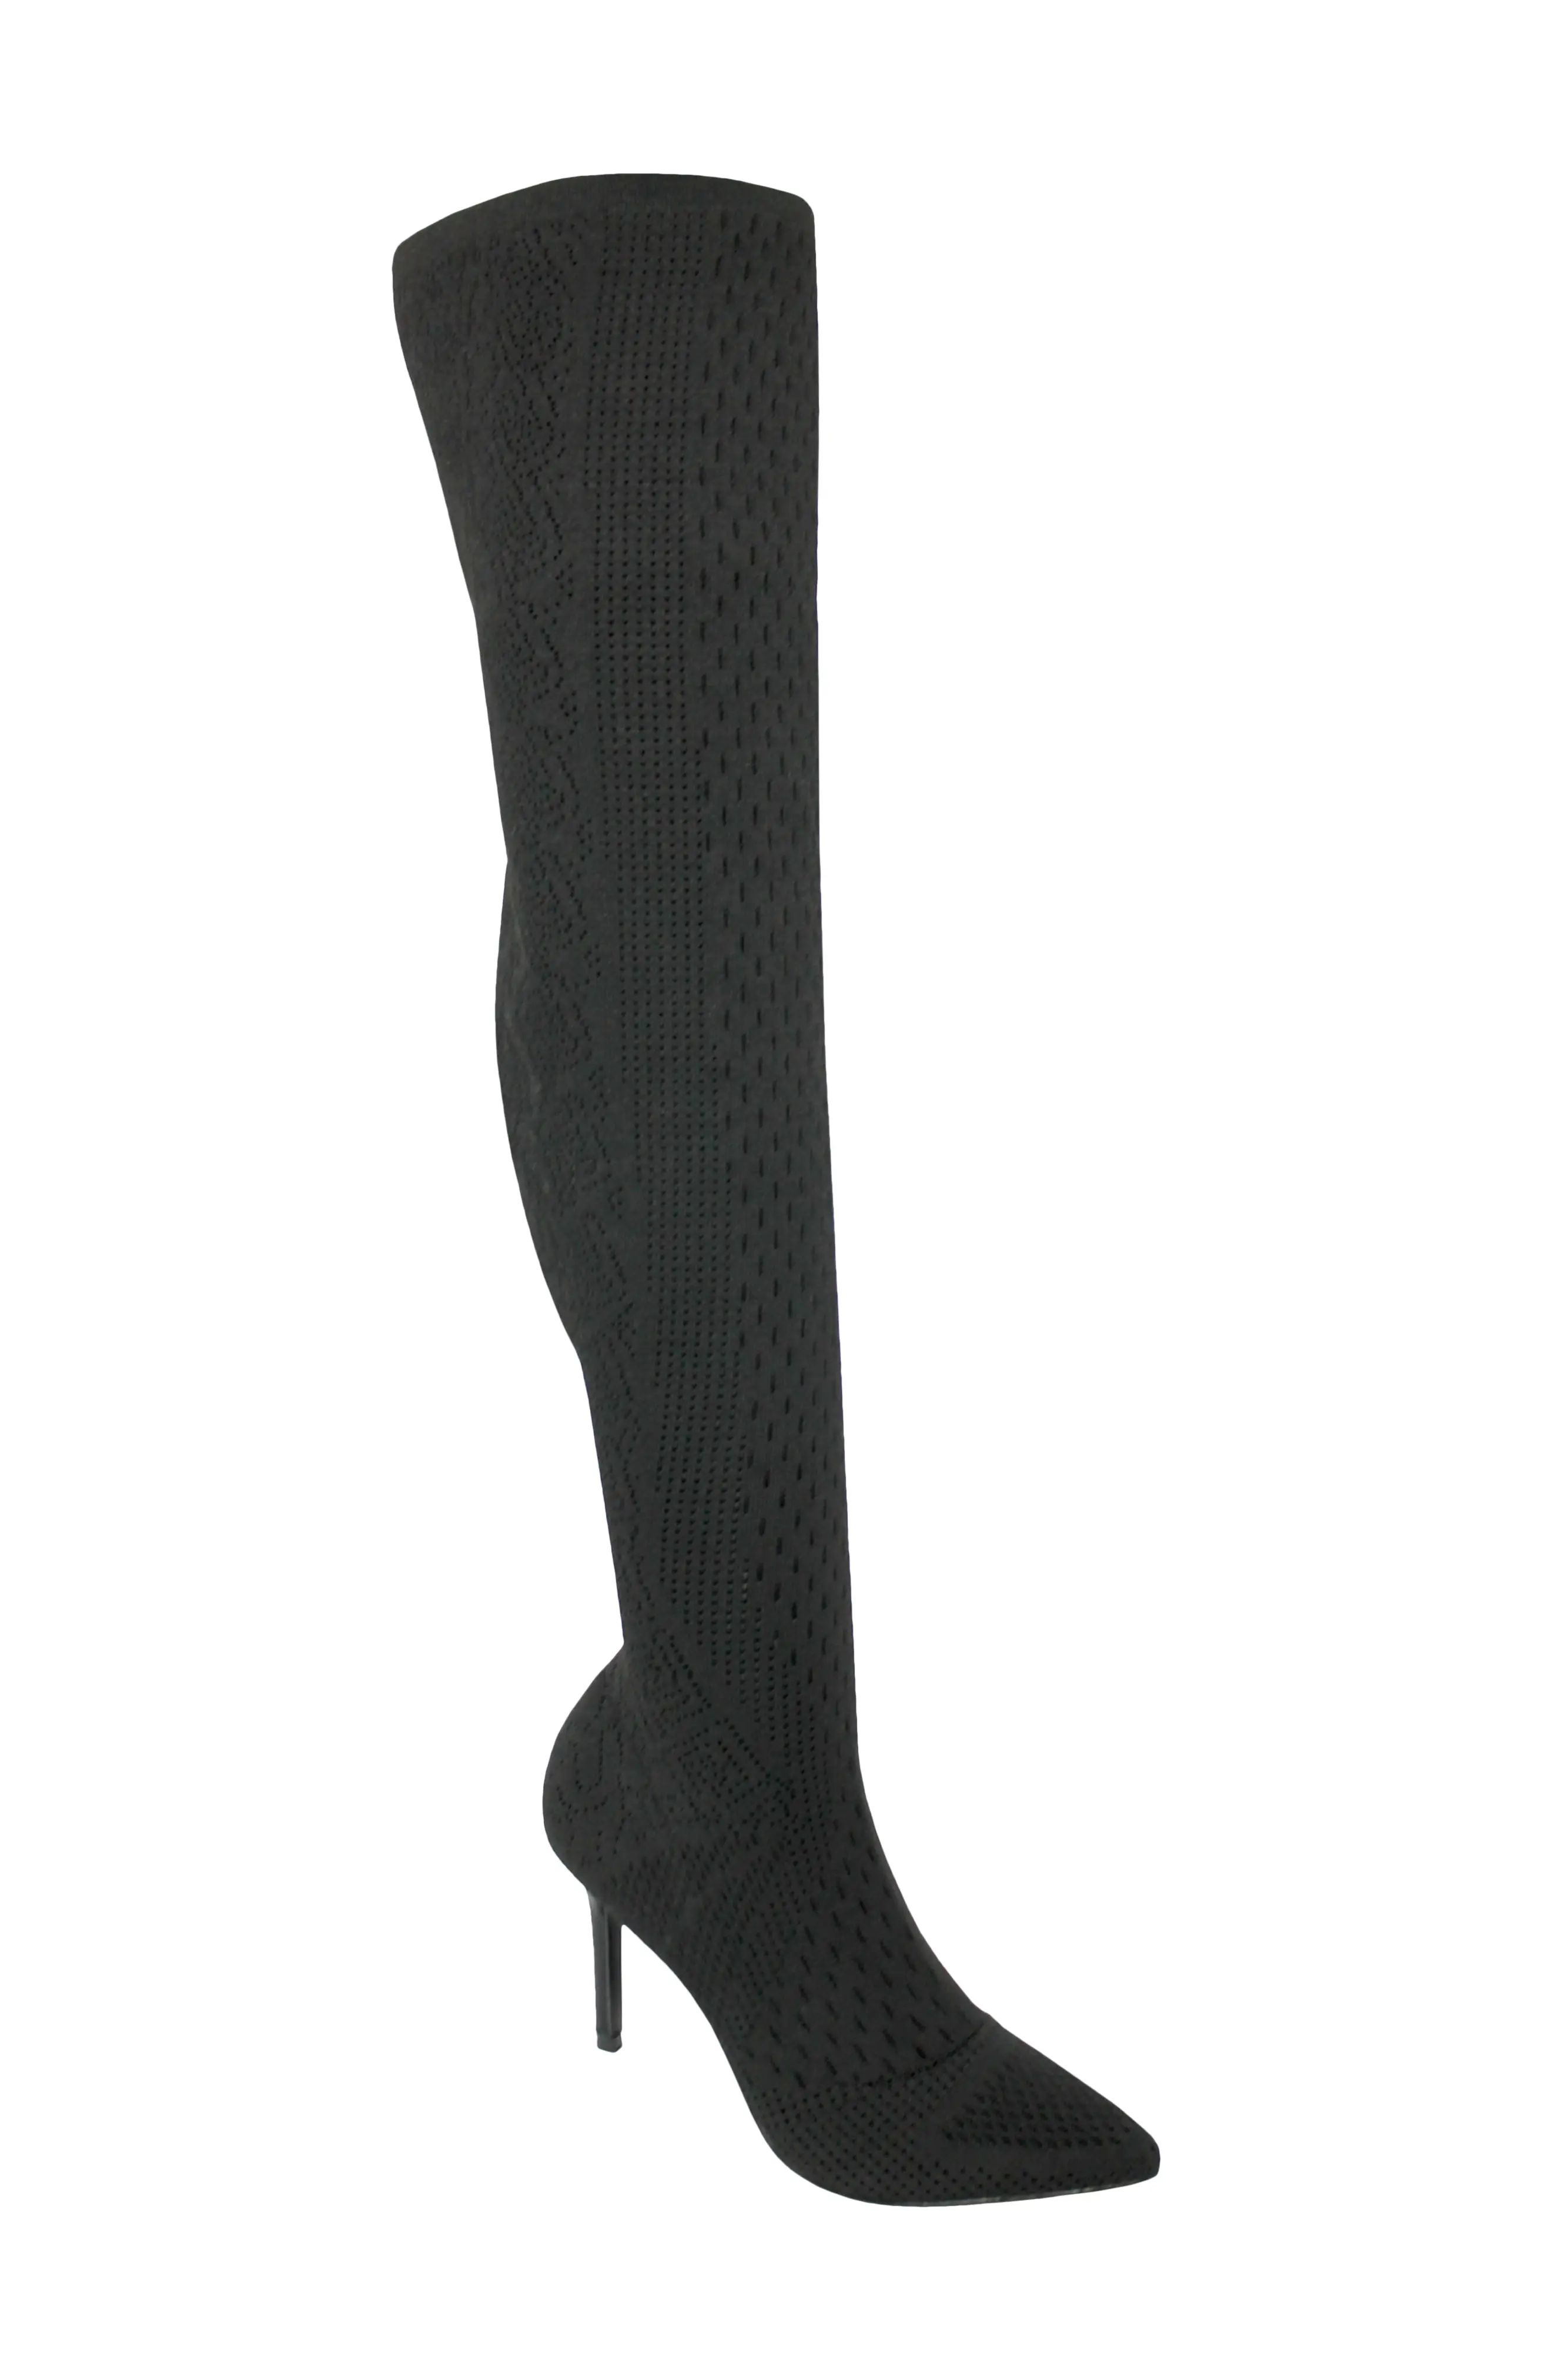 Women's Charles By Charles David Version Pointed Toe Over The Knee Boot, Size 5.5 M - Black | Nordstrom